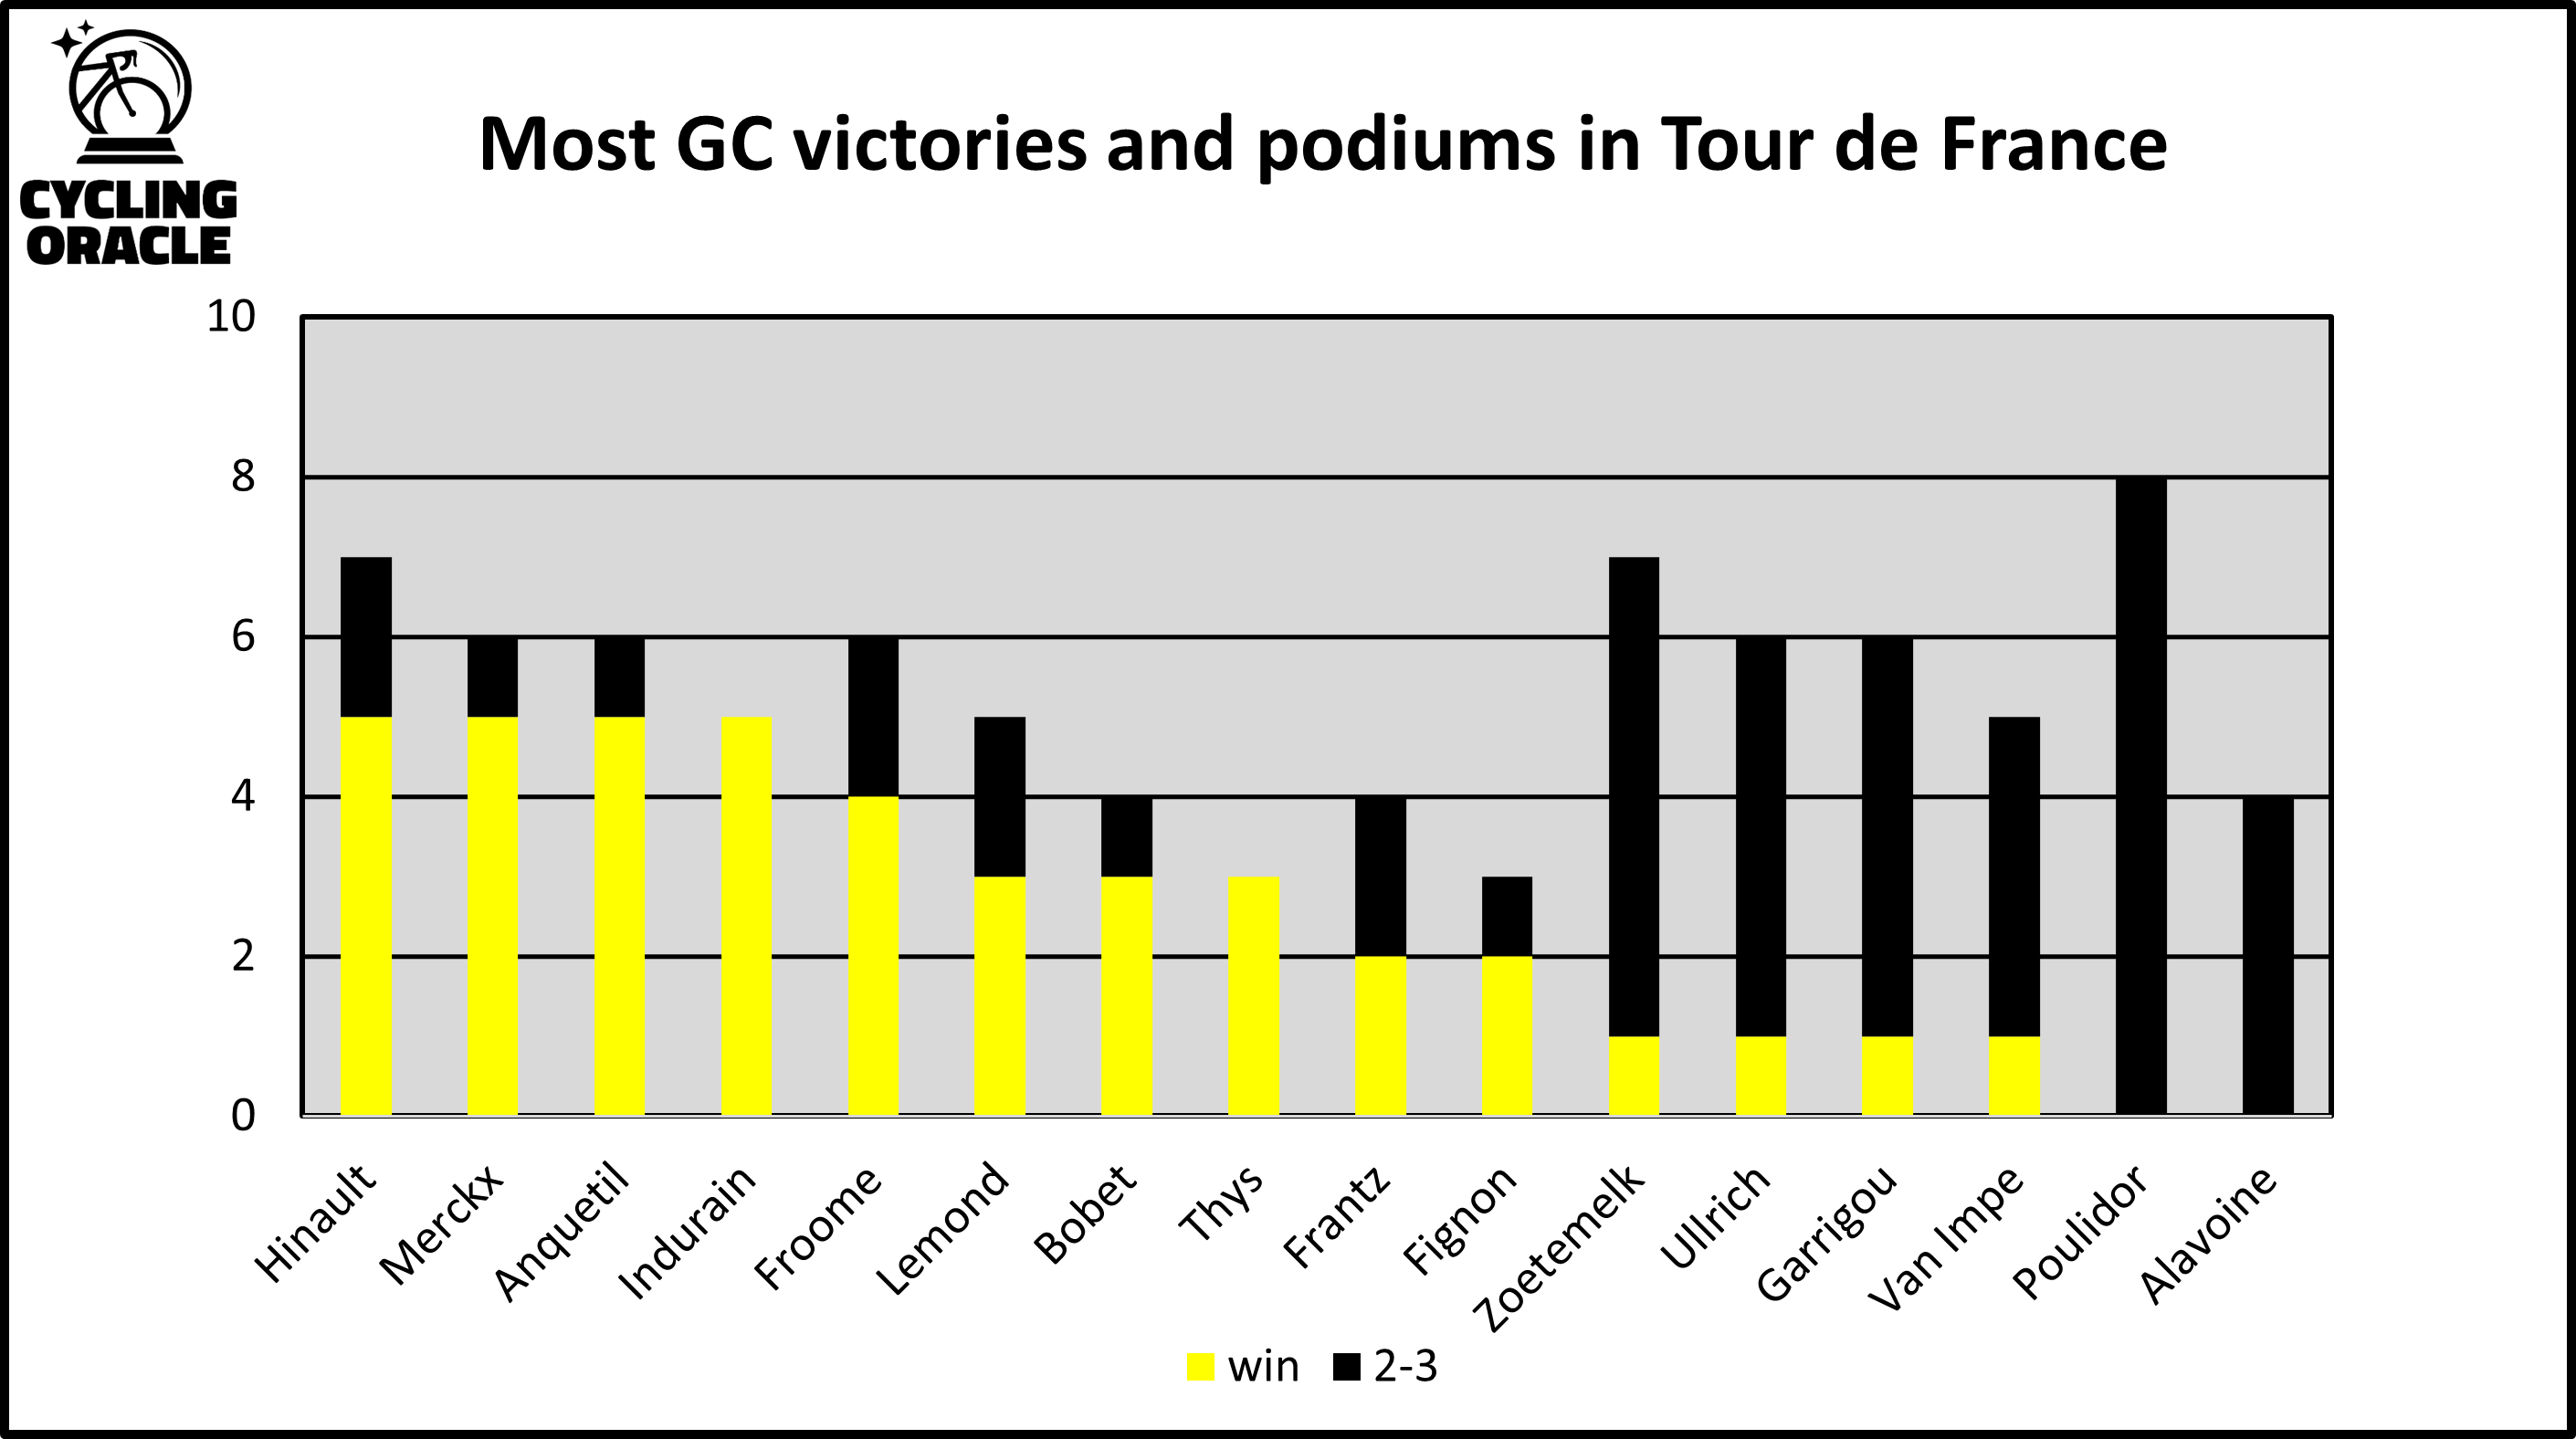 Most GC wins in Tour history